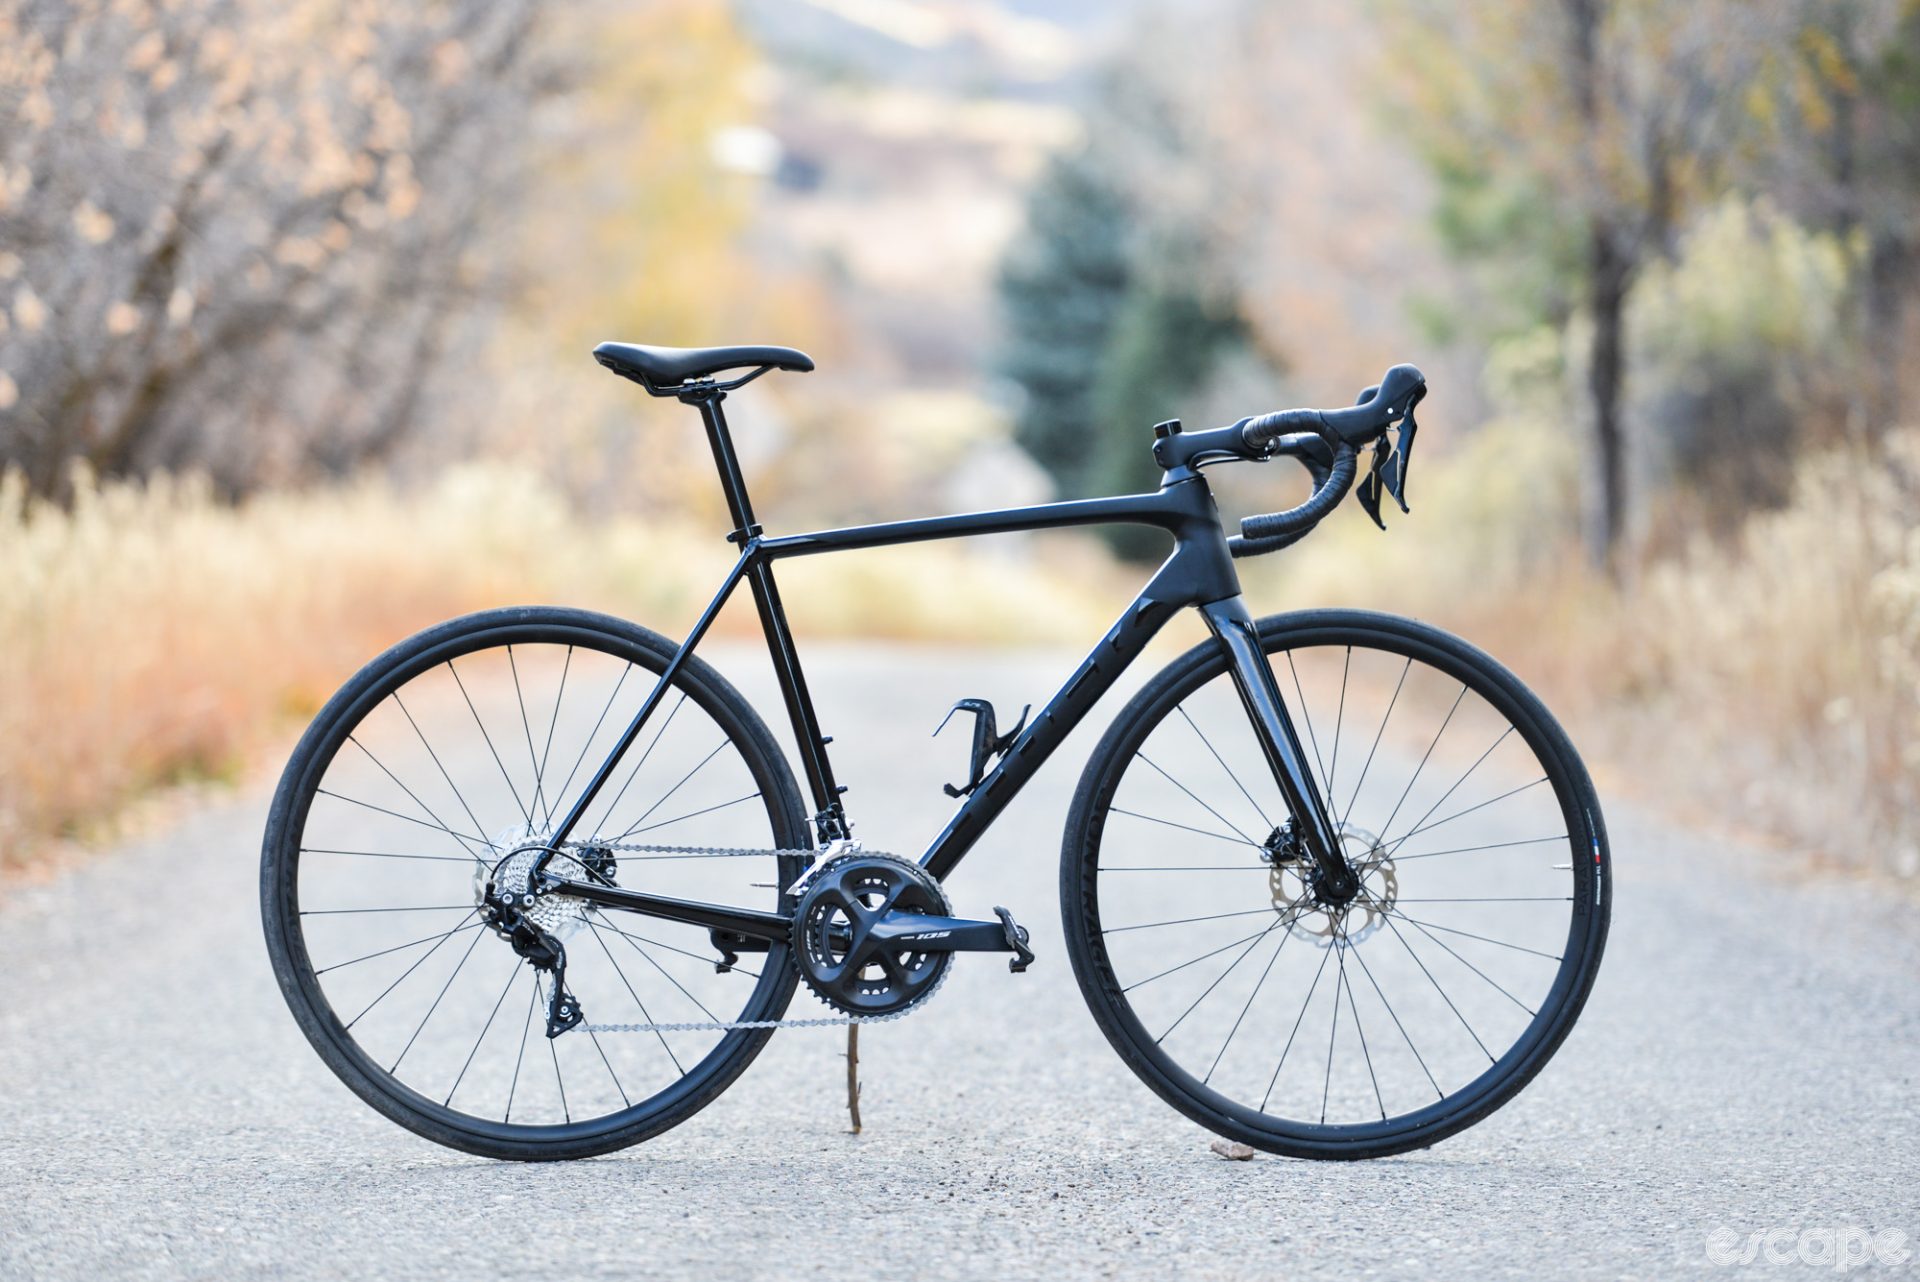 The Trek Emonda ALR5 in profile, with sleek black paint and blackout logos, all-grey Shimano 105 parts, and black Bontrager wheels and tires. In other words: black.